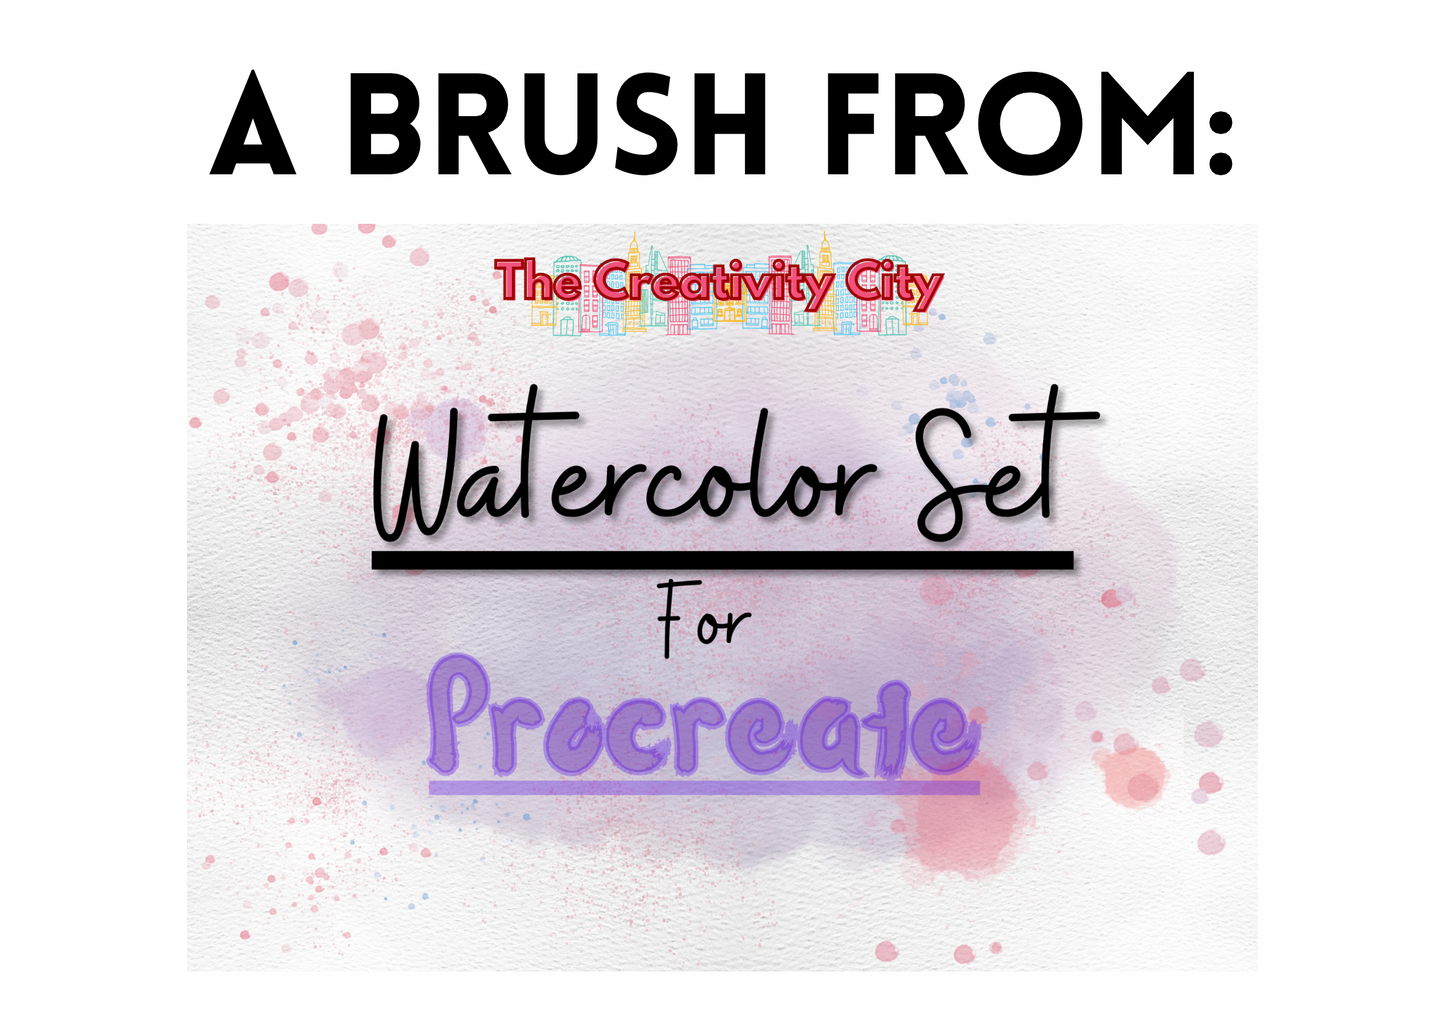 FREE! Streaky Watercolor brush for Procreate